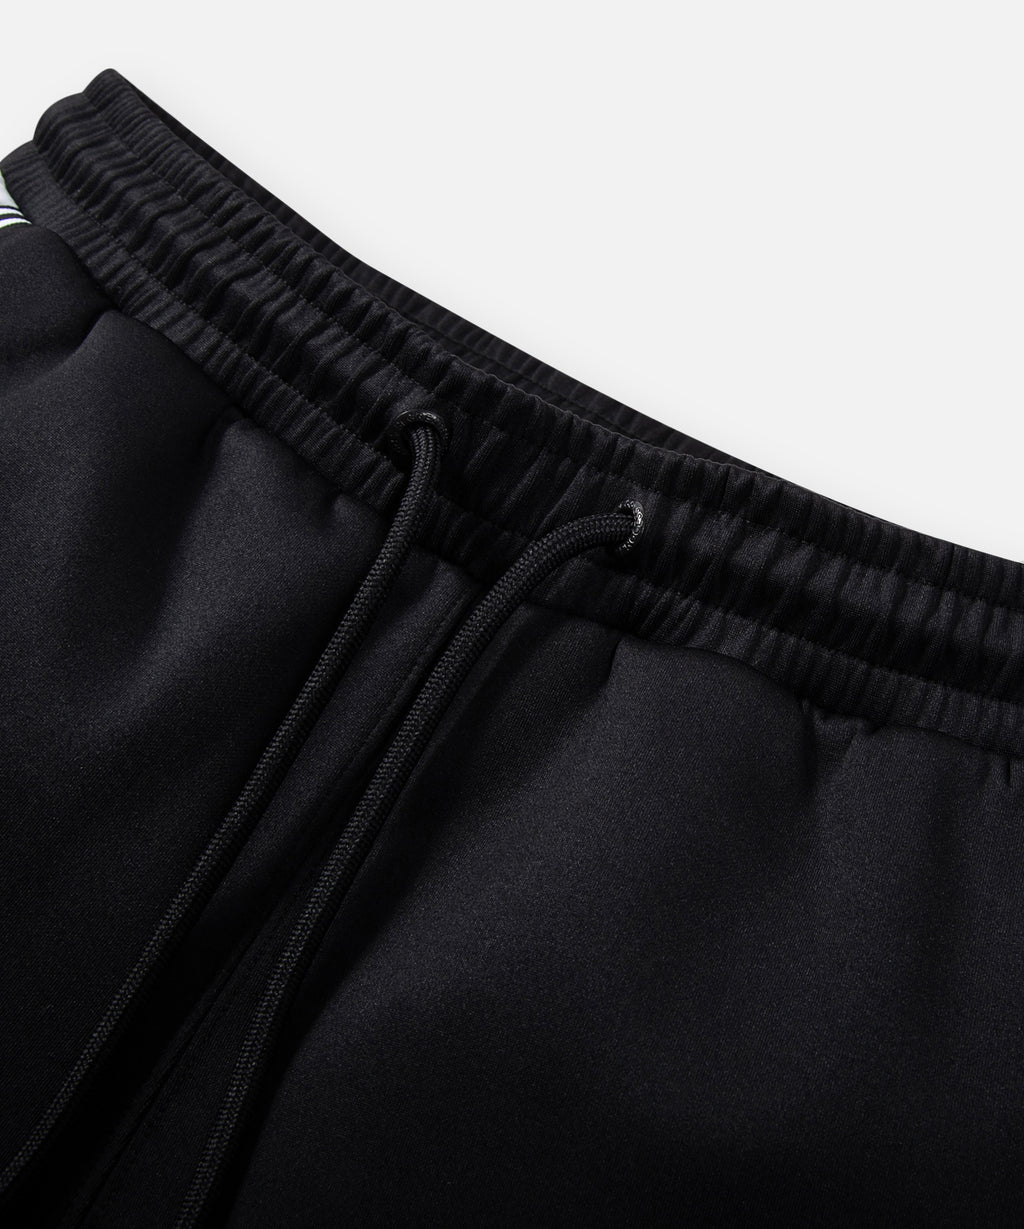  Drawcord waistband on Paper Planes Basketball Short color Black.